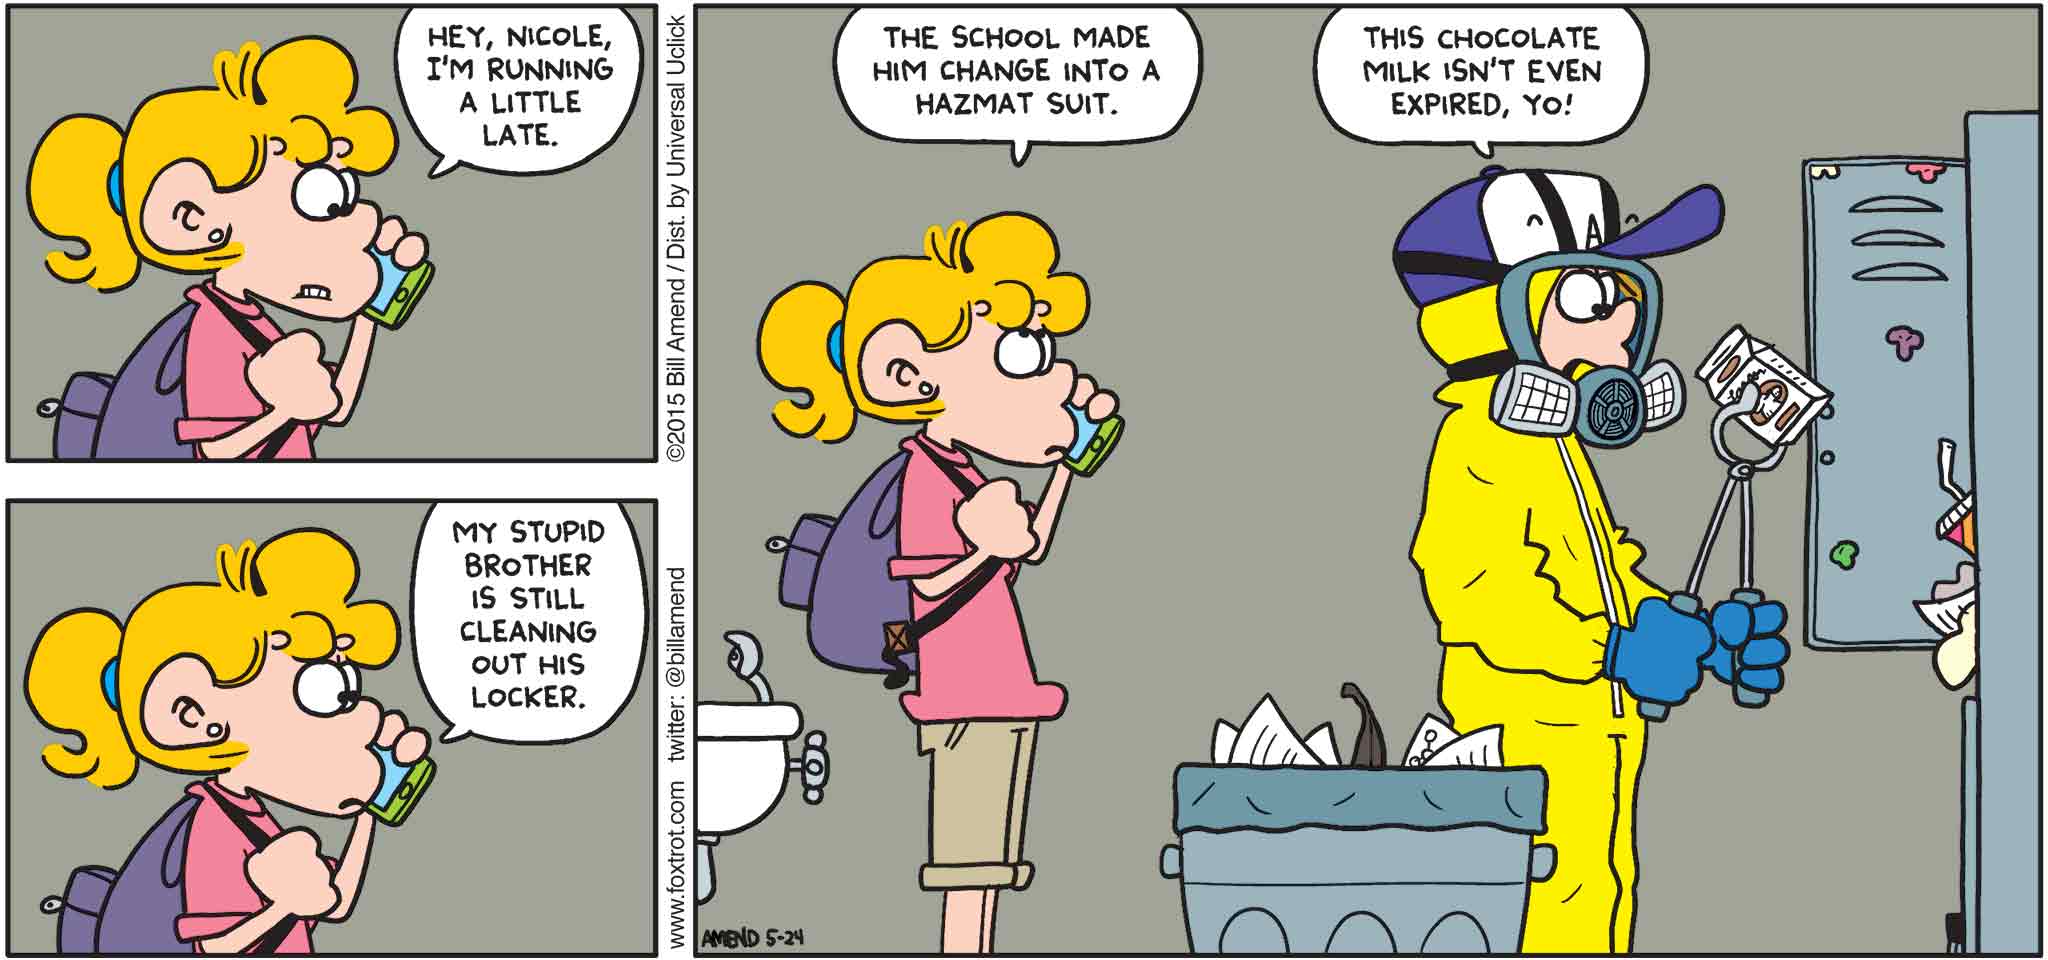 FoxTrot by Bill Amend - "Hurl Locker" published May 24, 2015 - Paige: Hey, Nicole, I'm running a little late. My stupid brother is cleaning out his locker. The school made him change into a hazmat suit. Peter: This chocolate milk isn't even expired, yo!